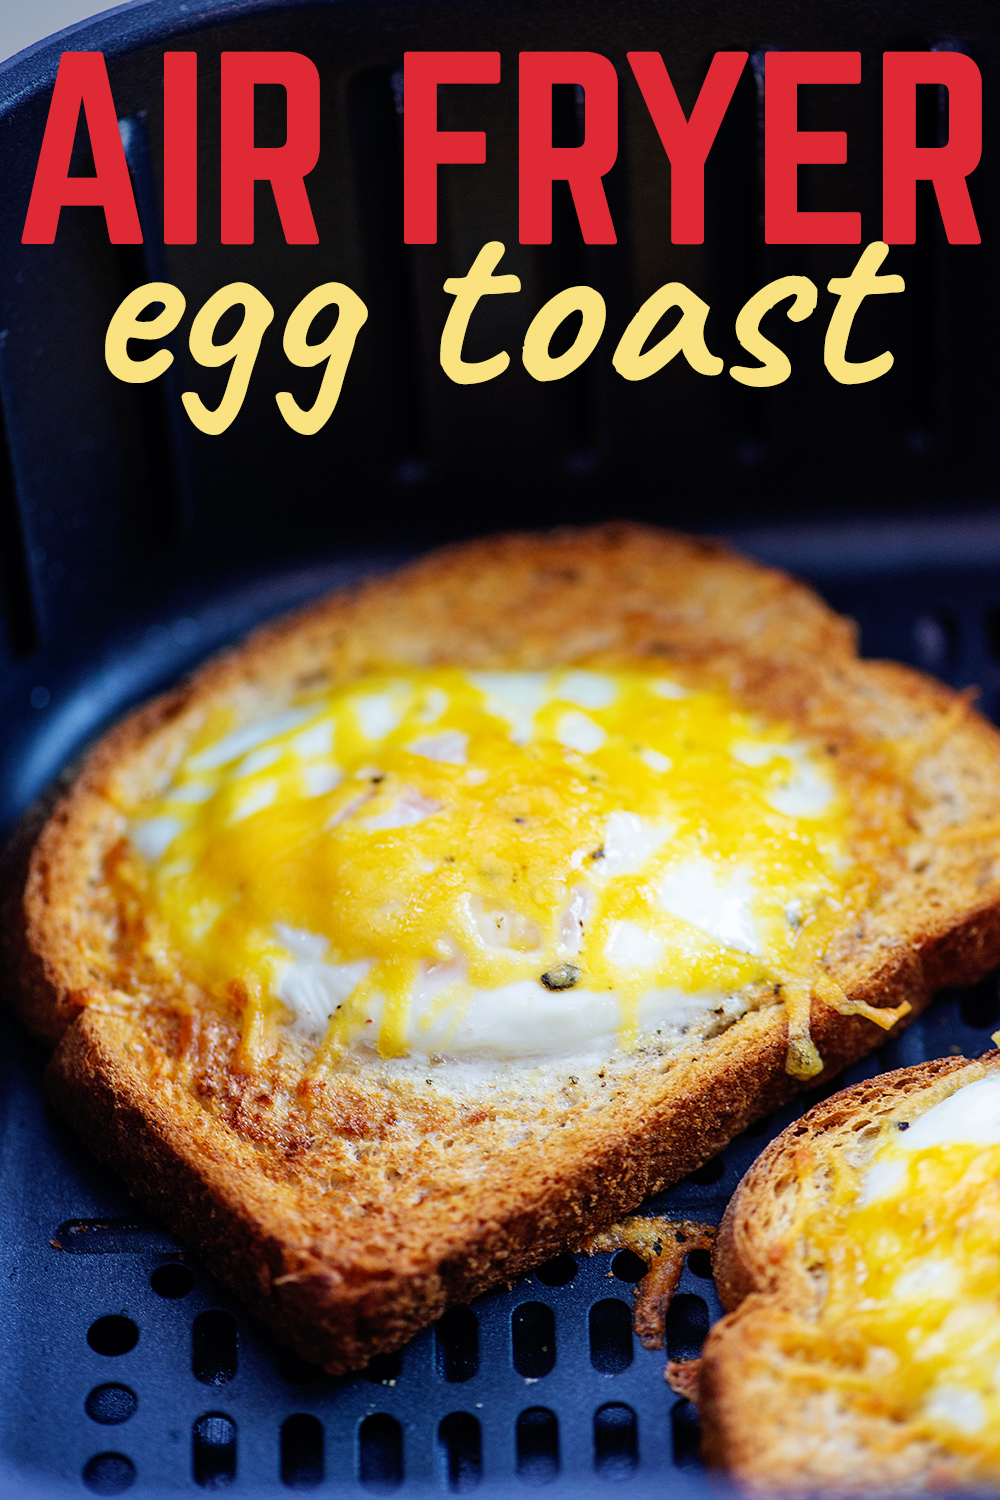 The perfect breakfast comes out of the air fryer in just 10 minutes! Egg and toast all in one!